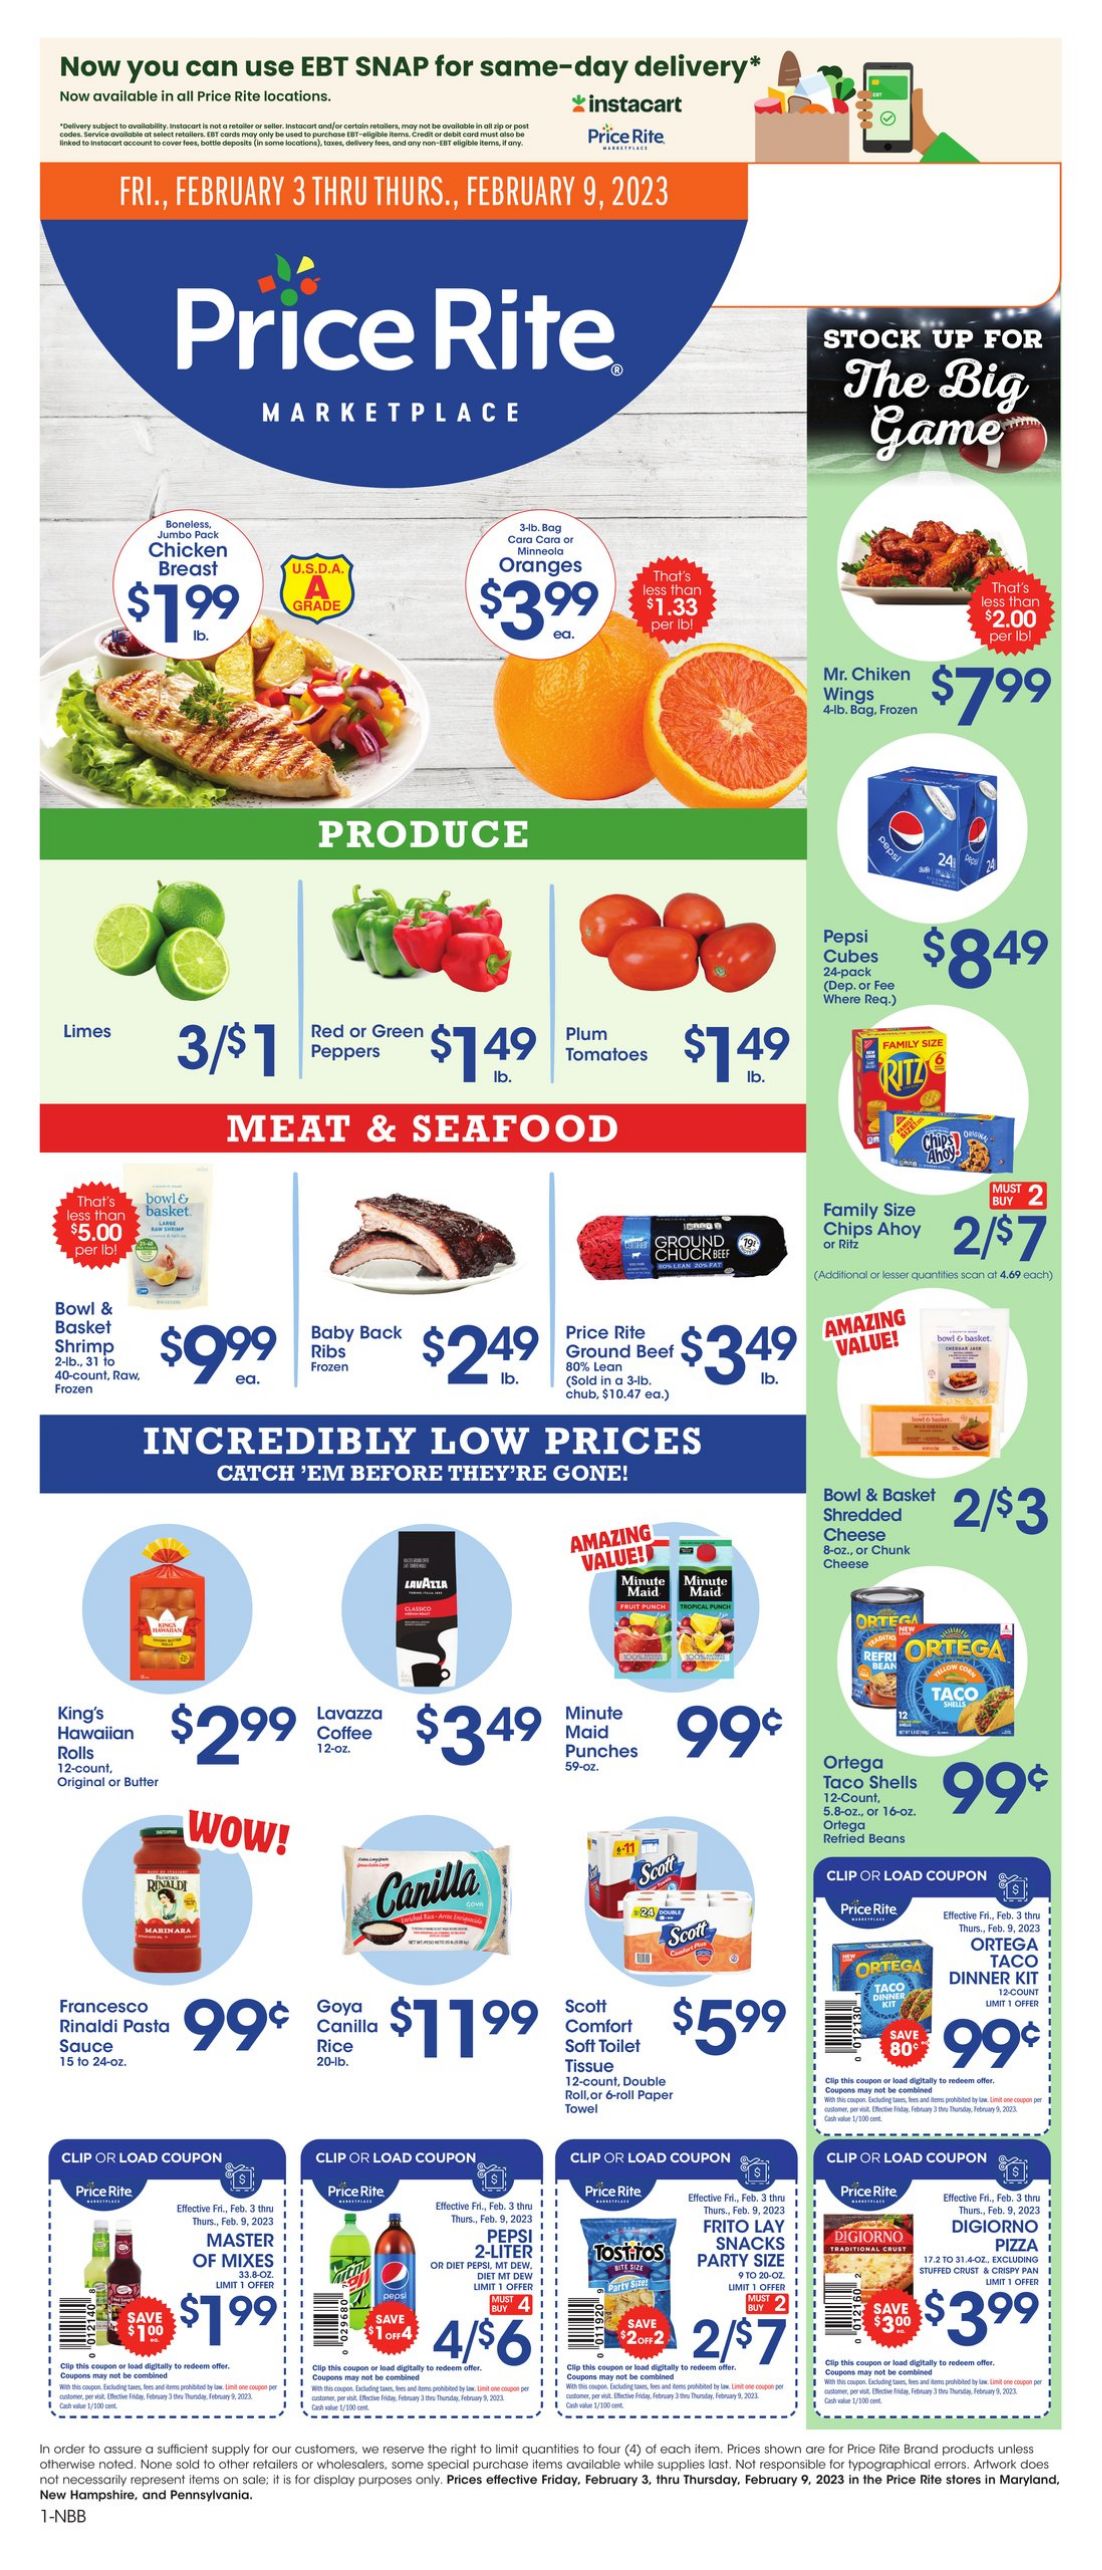 Price Rite Promotional weekly ads